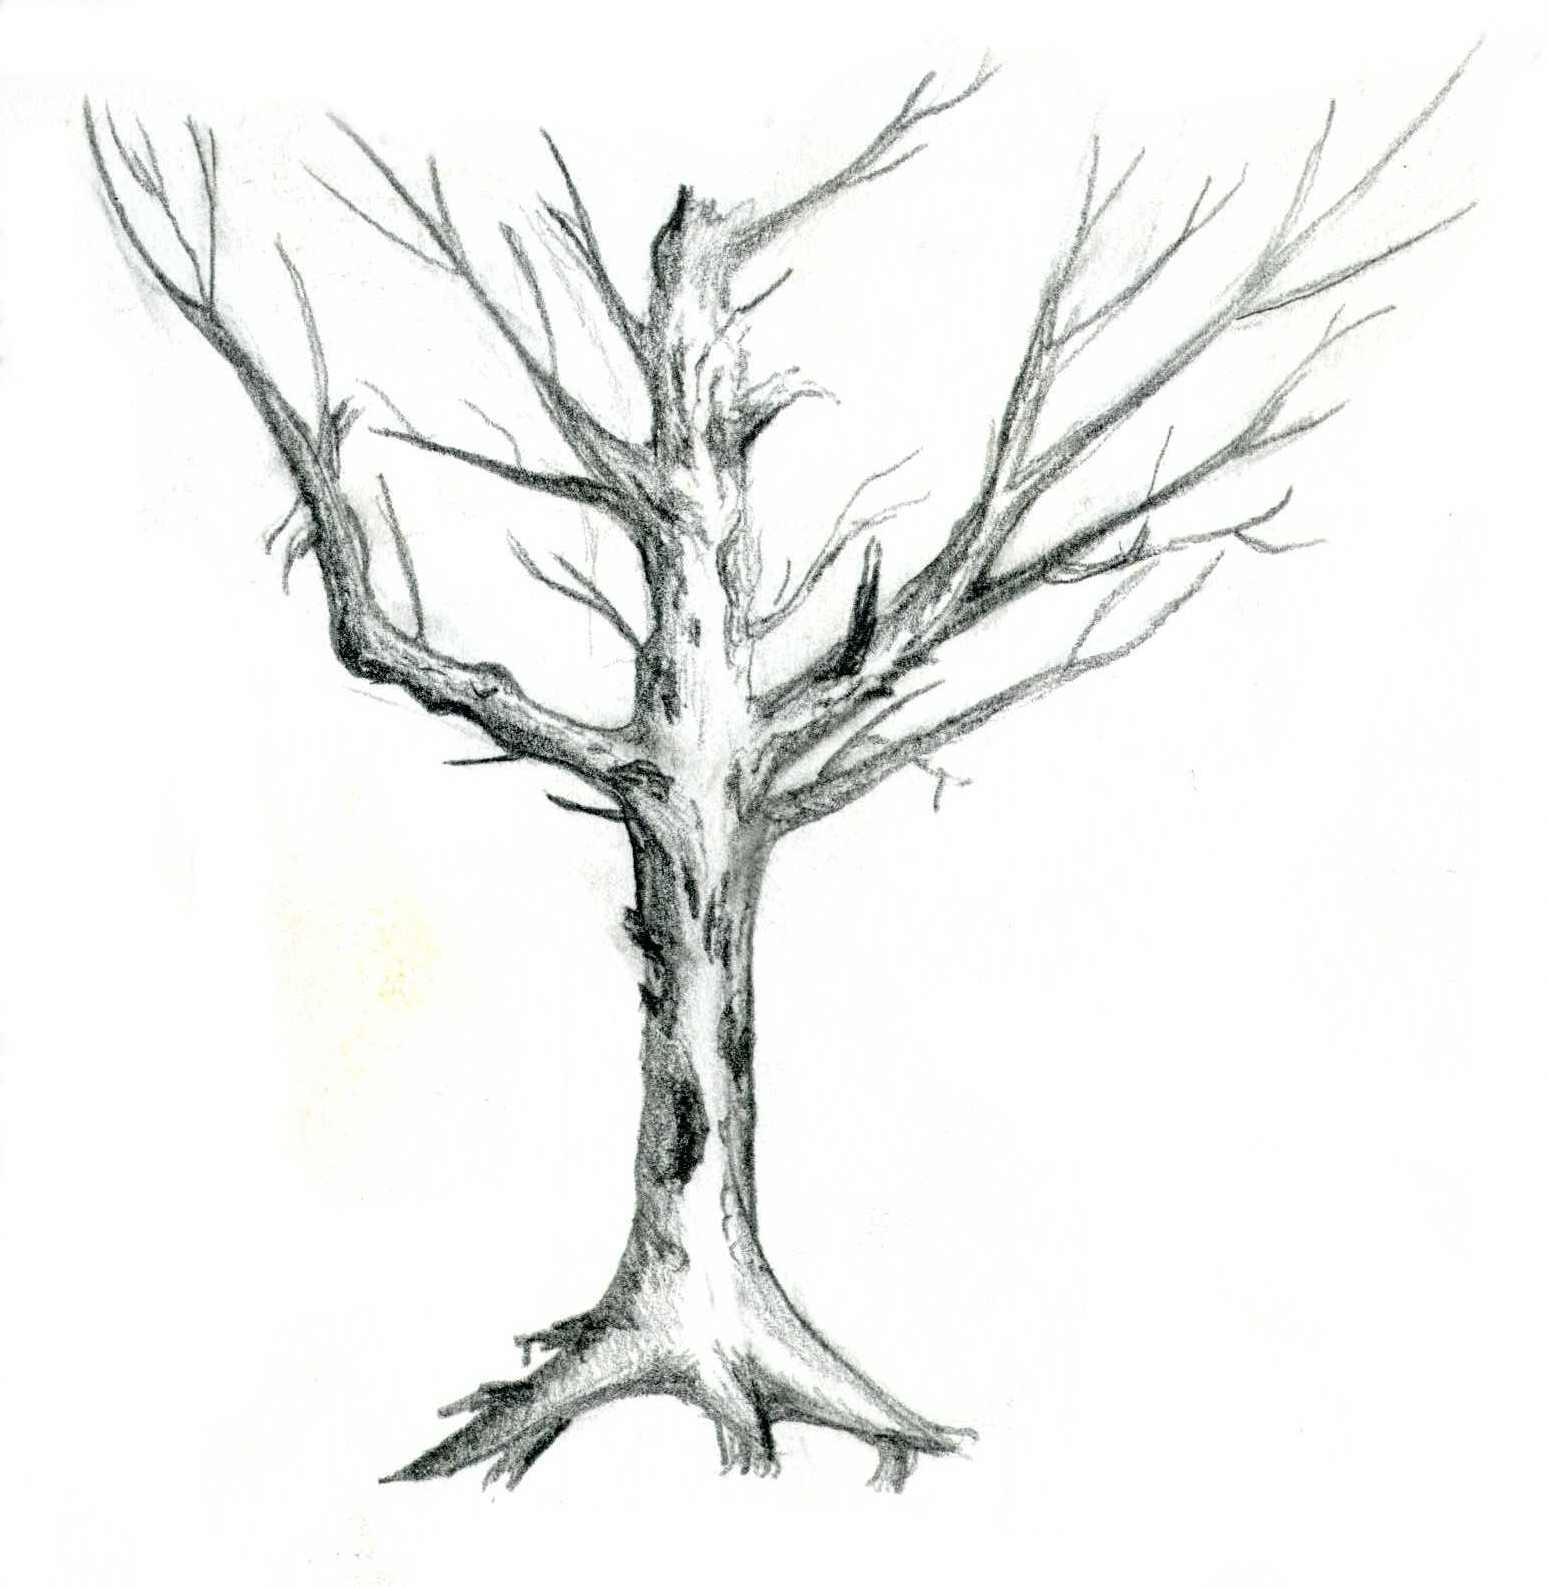 Tree Drawing Stock Photos and Images - 123RF